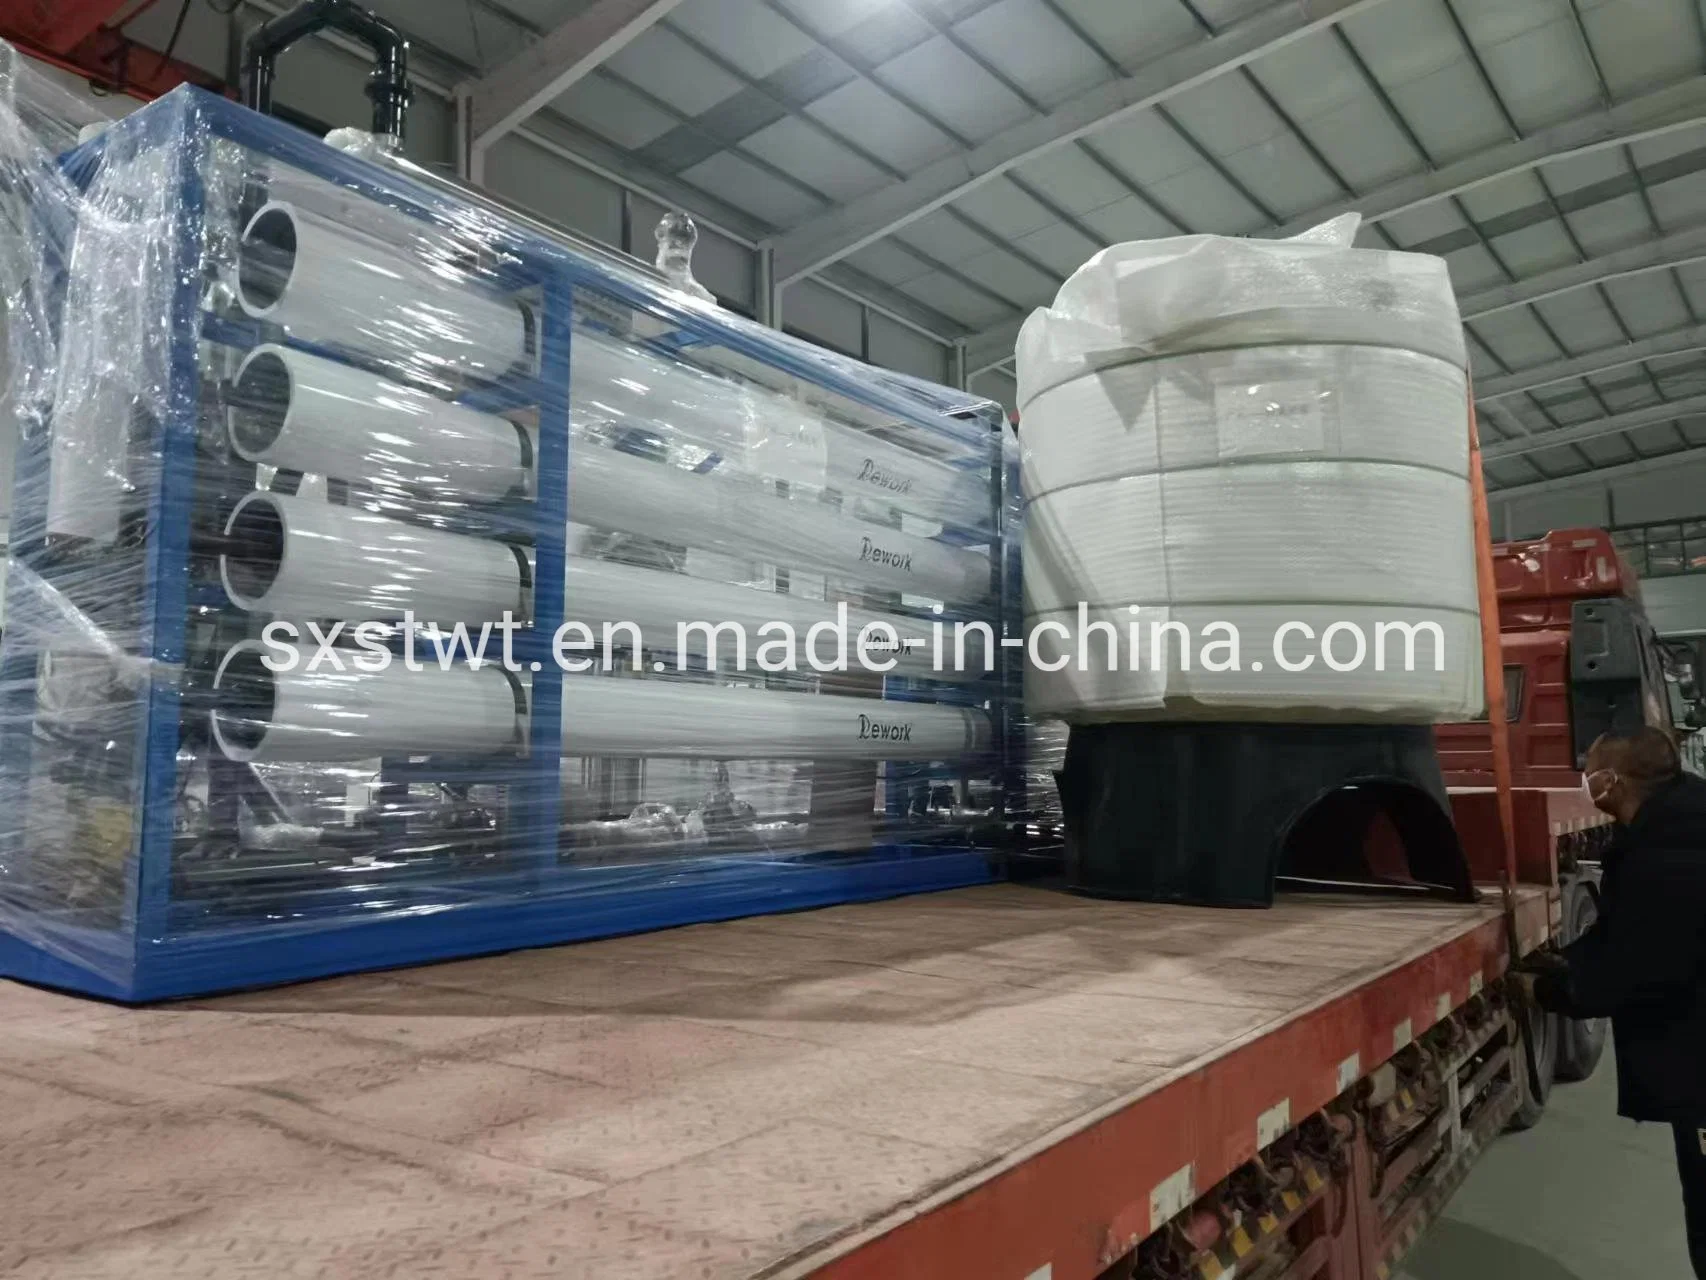 Hot Sell Purification Machine Commercial Equipment Reverse Osmosis Water System Treatment 12m3/H